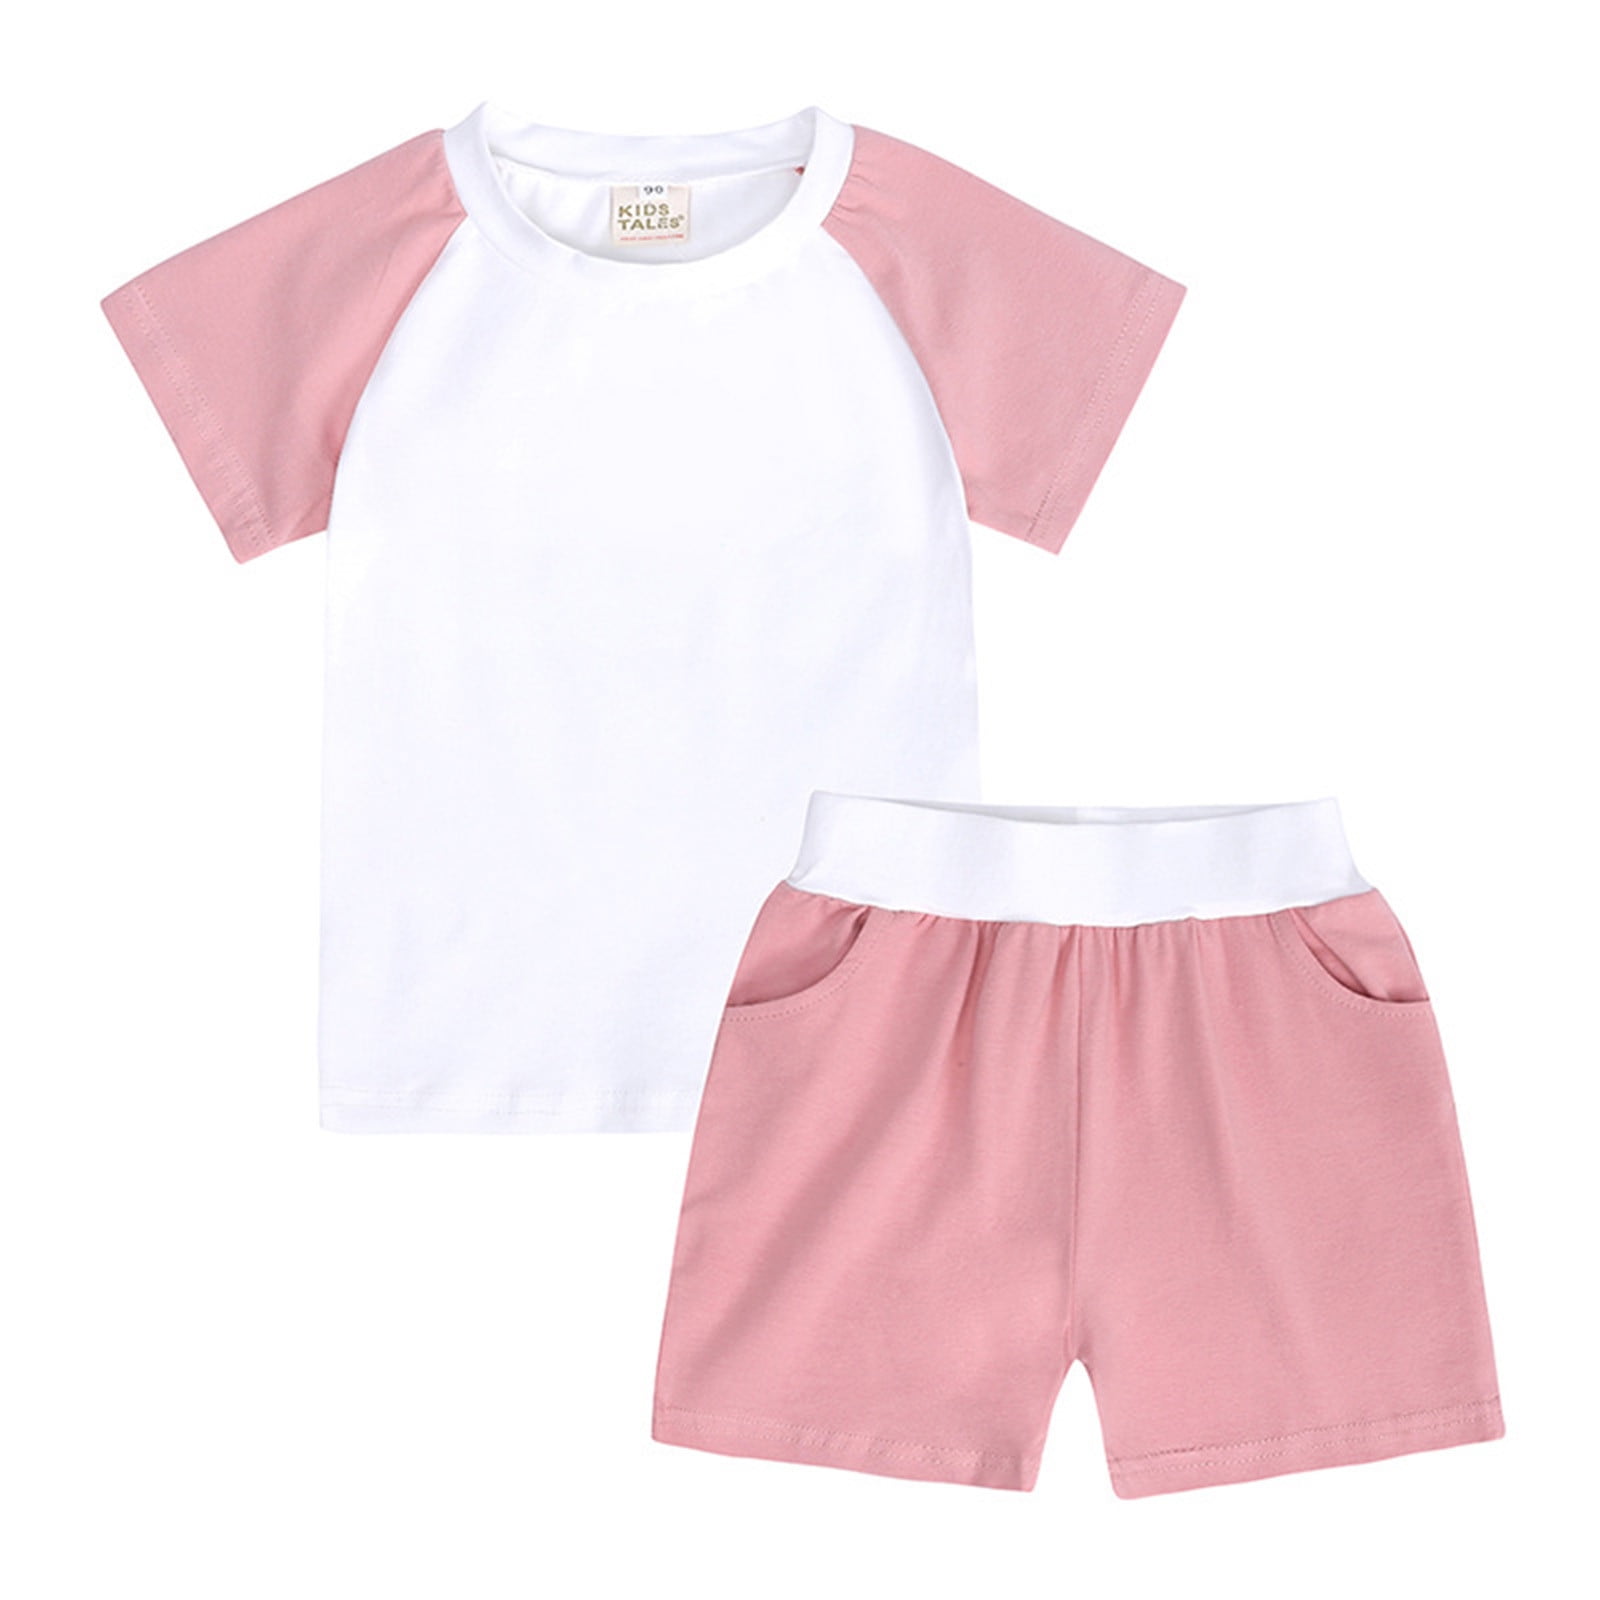 AherBiu Baby Toddler Clothes 2 Piece Summer Outfits for Boys Girls ...